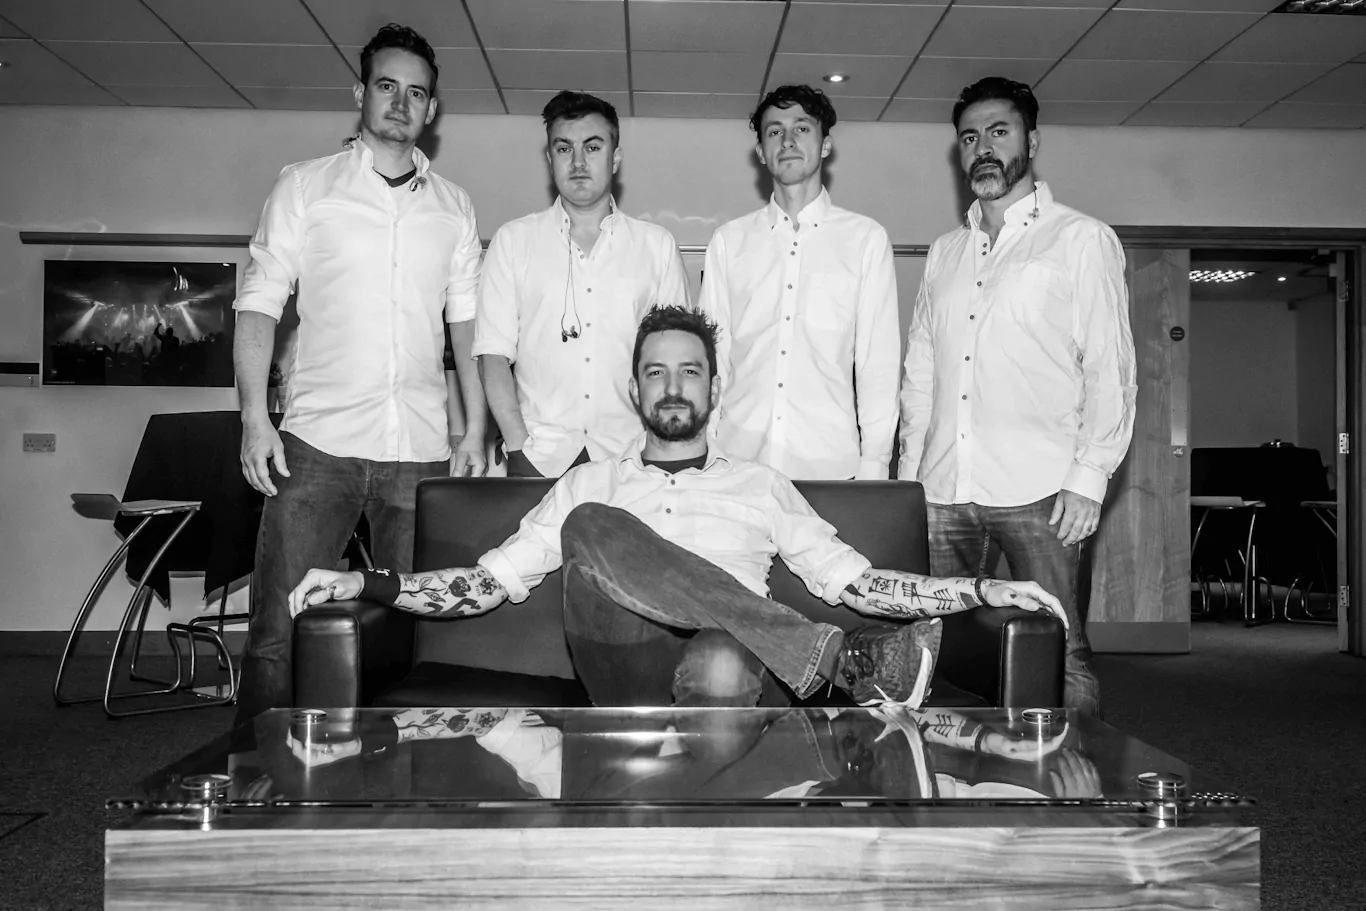 FRANK TURNER & THE SLEEPING SOULS announce headline Belfast show at Limelight 1 on Friday, April 8th 2022